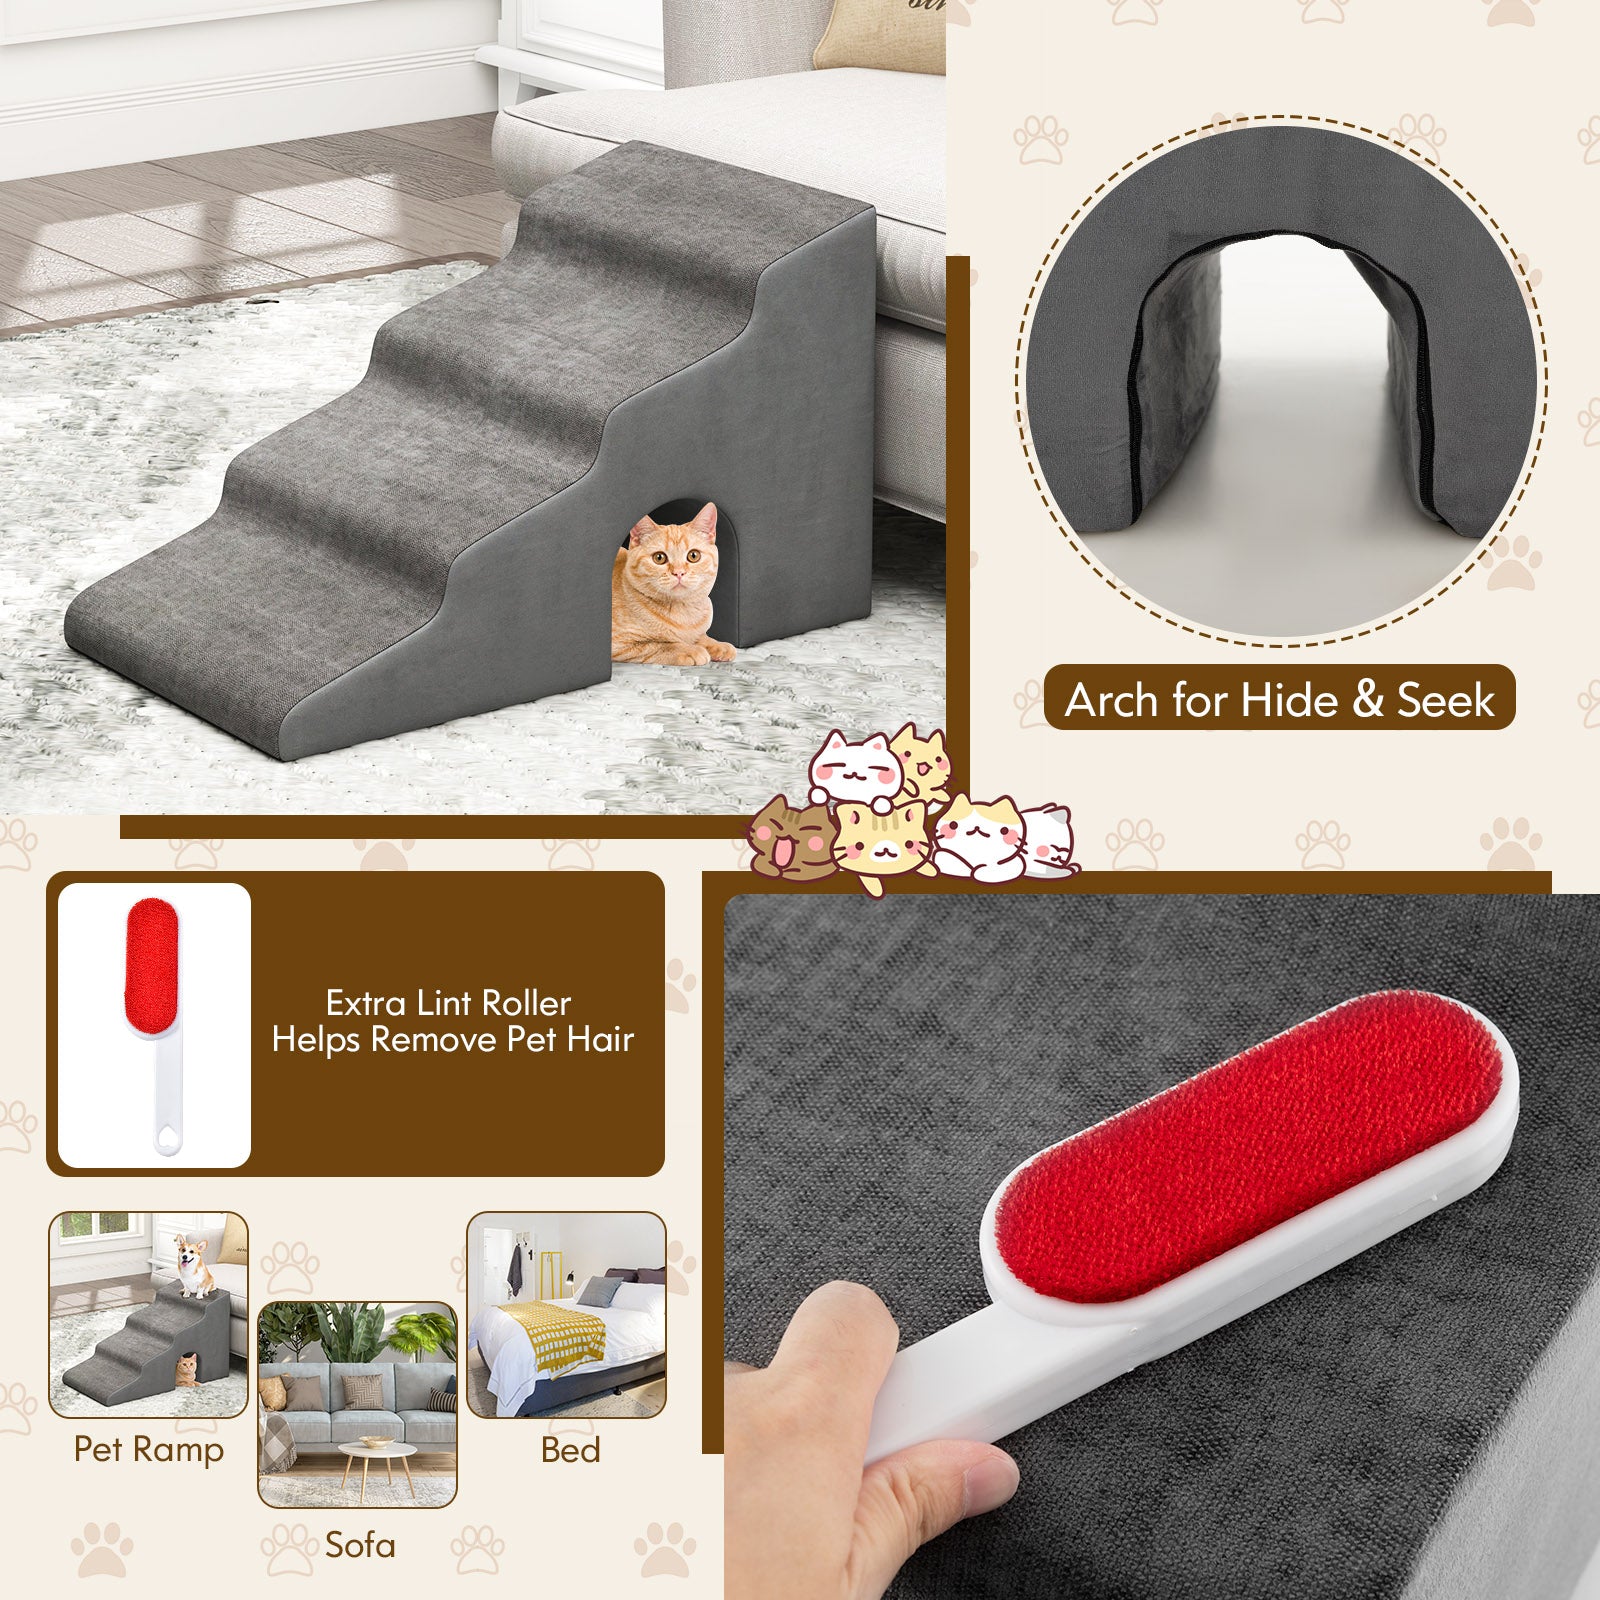 4-Tier High Density Foam Dog Ramps for High Beds and Couches-Grey